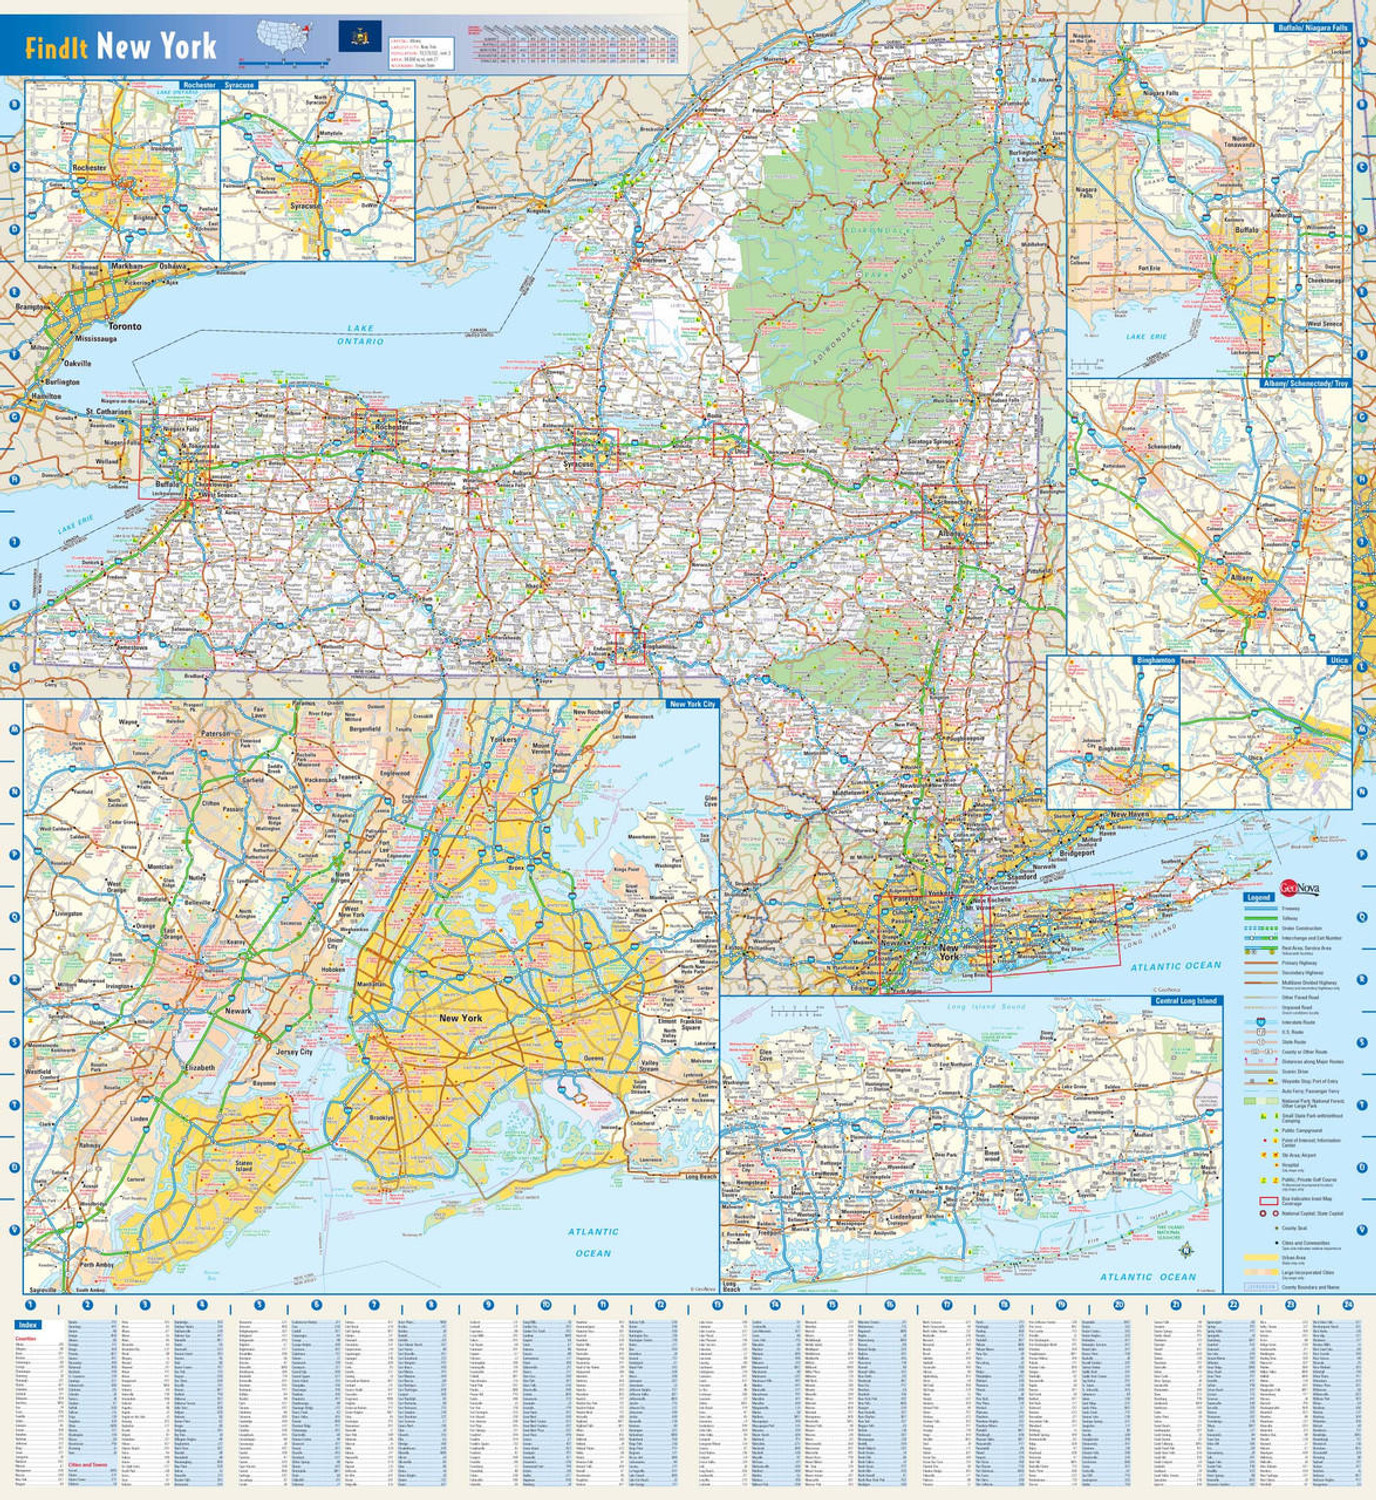 New York State Reference Wall Map, image 1, World Maps Online